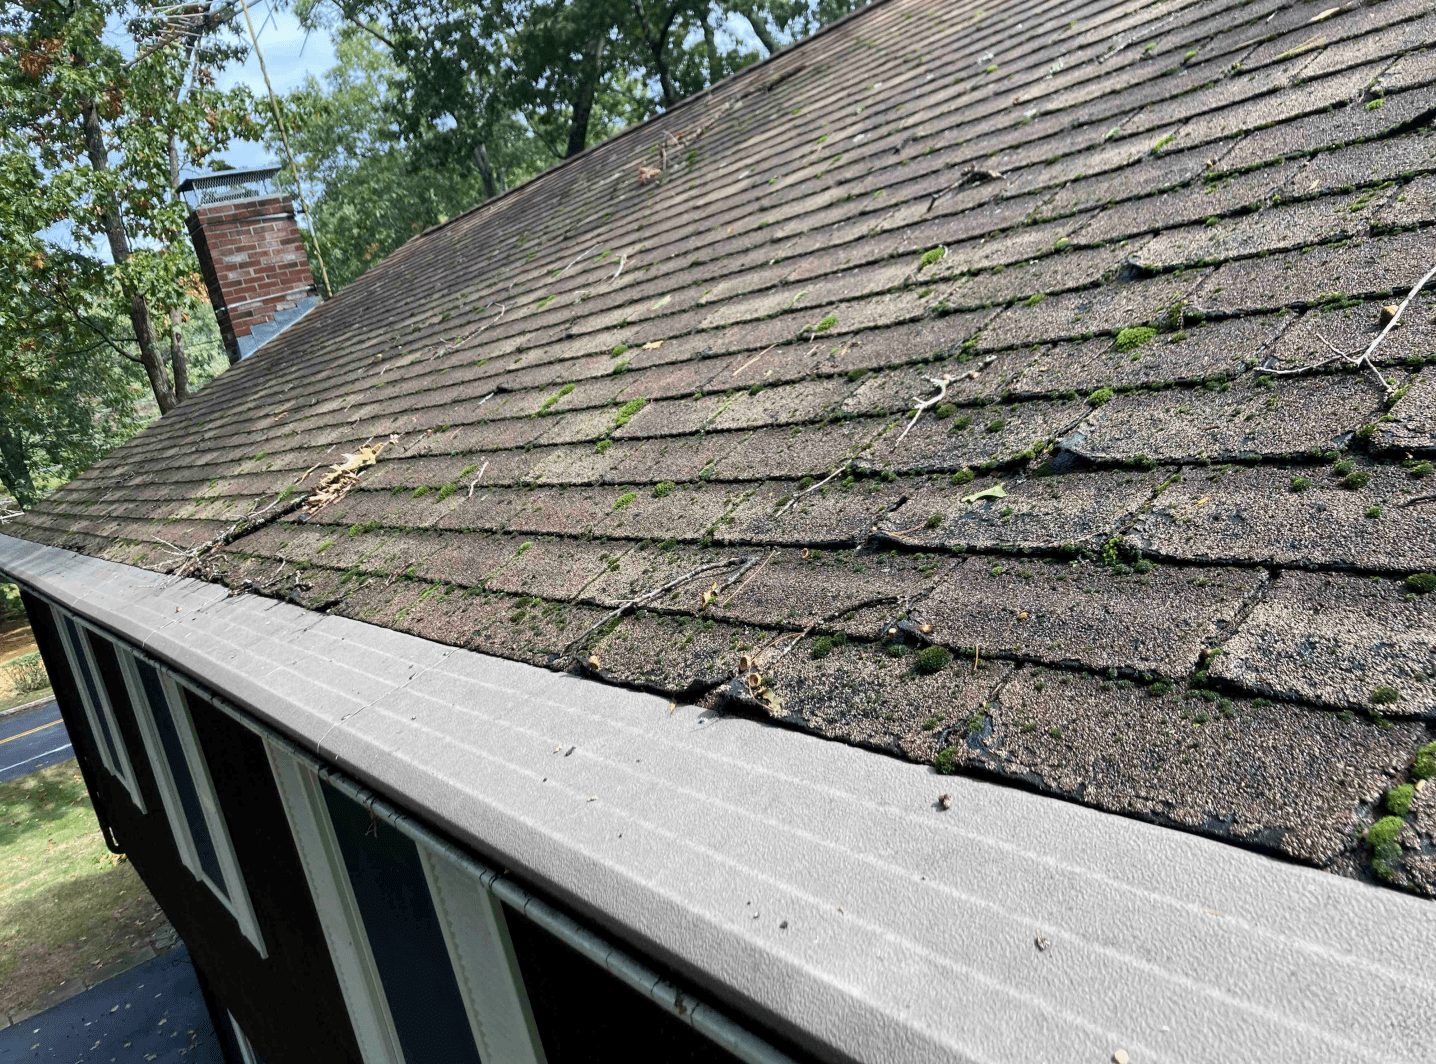 Crumbling asphalt shingles bordering the gutter cover. This is a recipe for disaster.